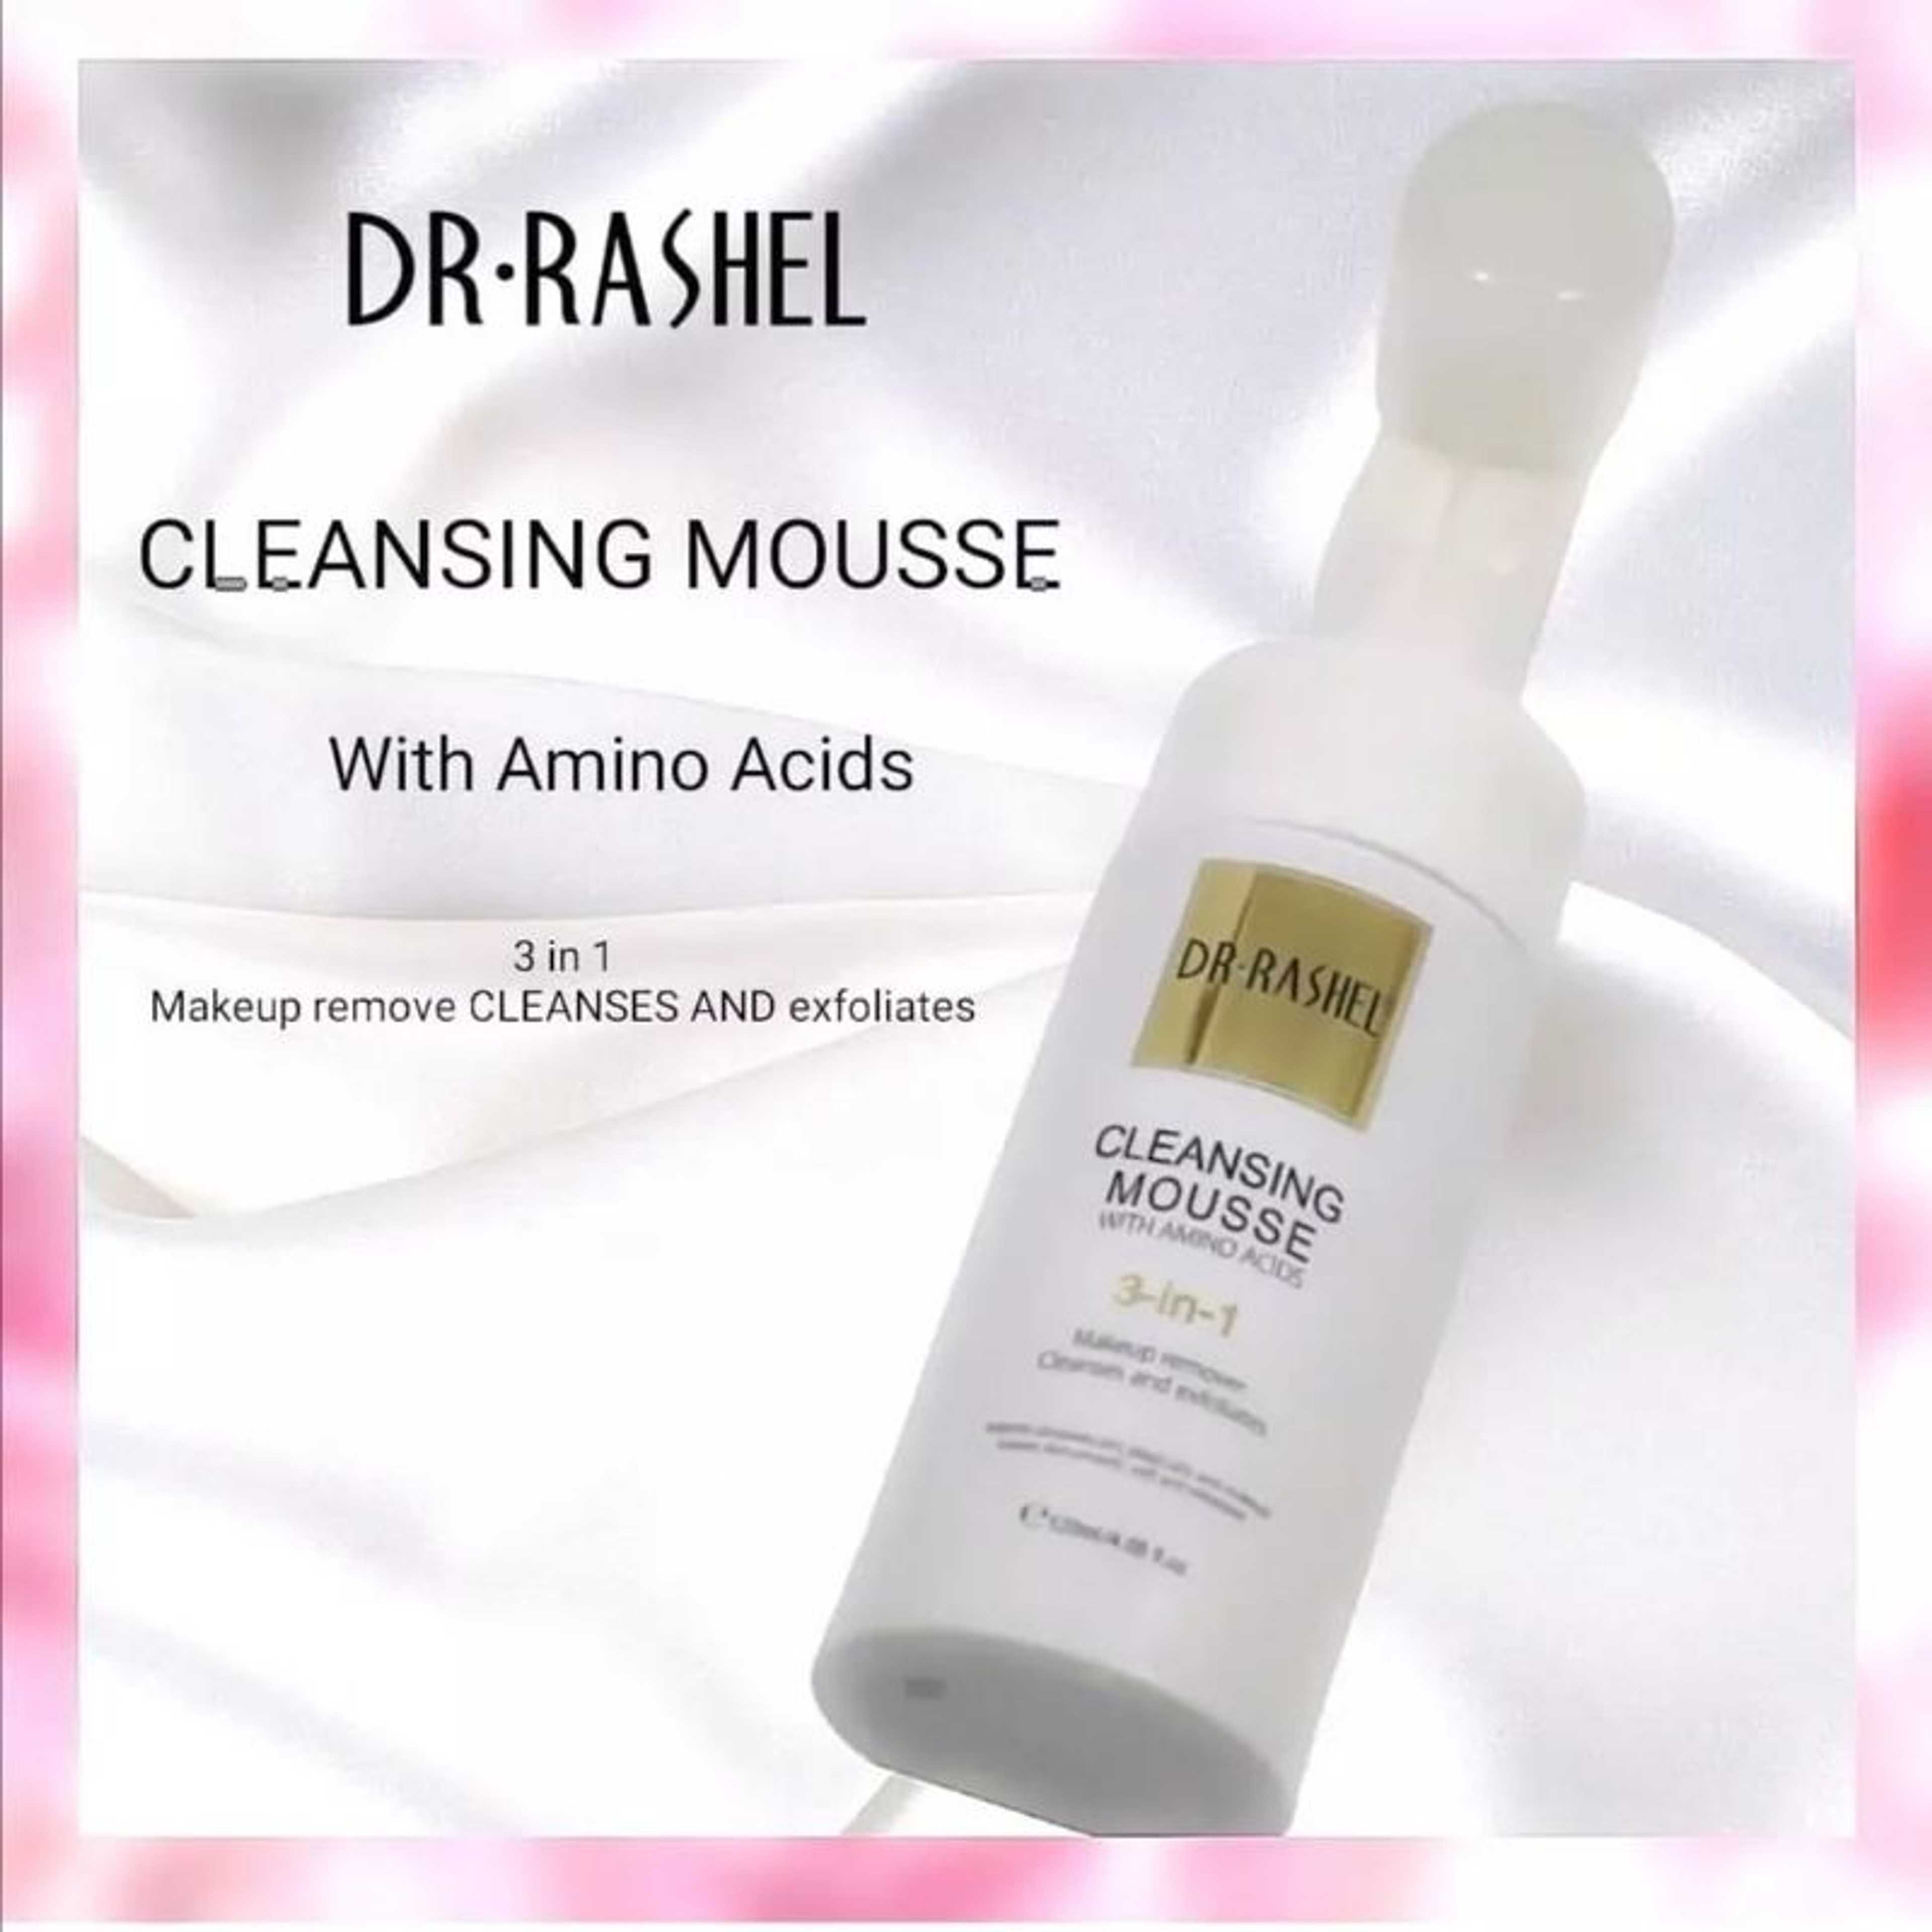 DR Rashel Cleansing Mouse 3In1 Makeup Remover, Cleanses, And Exfoliates